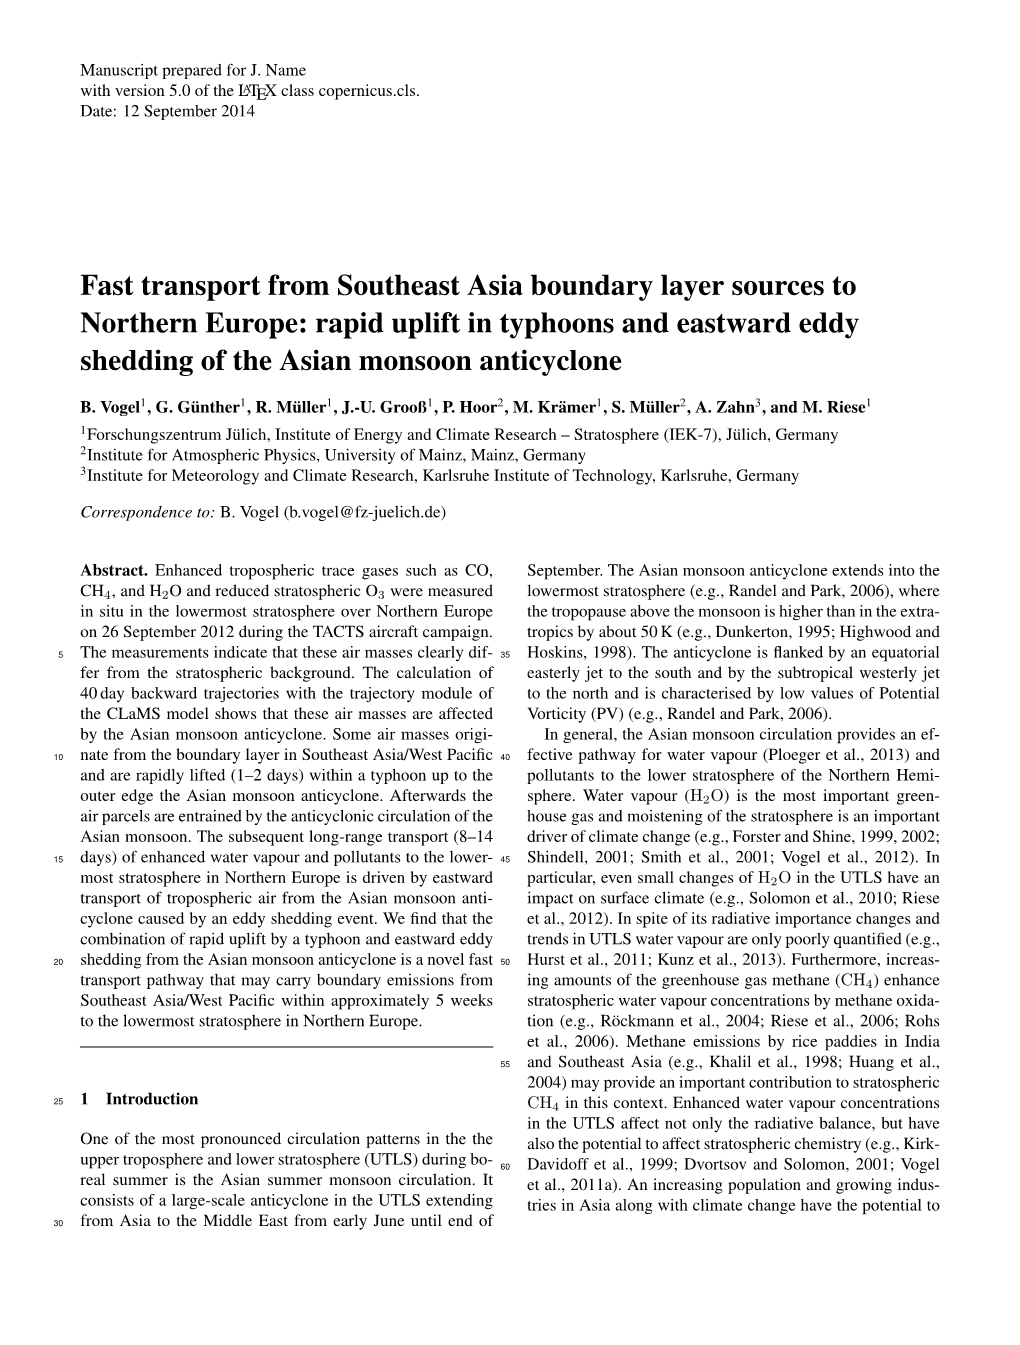 Fast Transport from Southeast Asia Boundary Layer Sources to Northern Europe: Rapid Uplift in Typhoons and Eastward Eddy Shedding of the Asian Monsoon Anticyclone